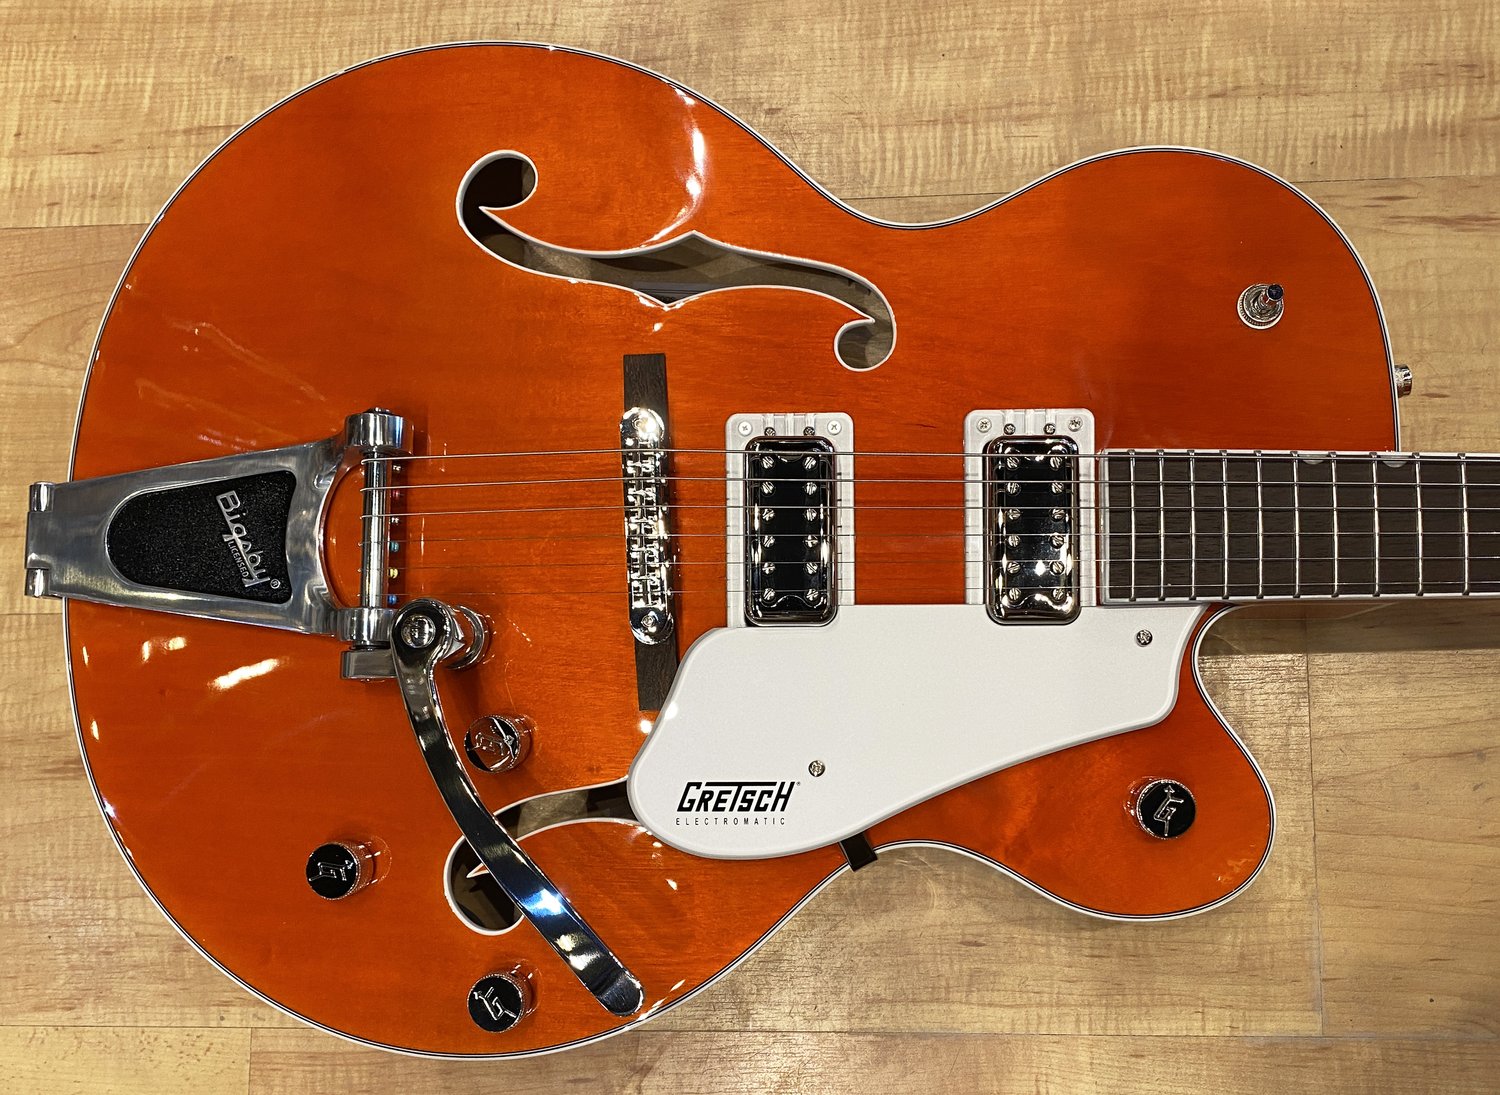 Electromatic　Gretsch　Andy　Fab　Bigsby　Babiuk's　G5420T　Single-Cut　Body　Orange　Classic　Hollow　—　with　Stain　Gear